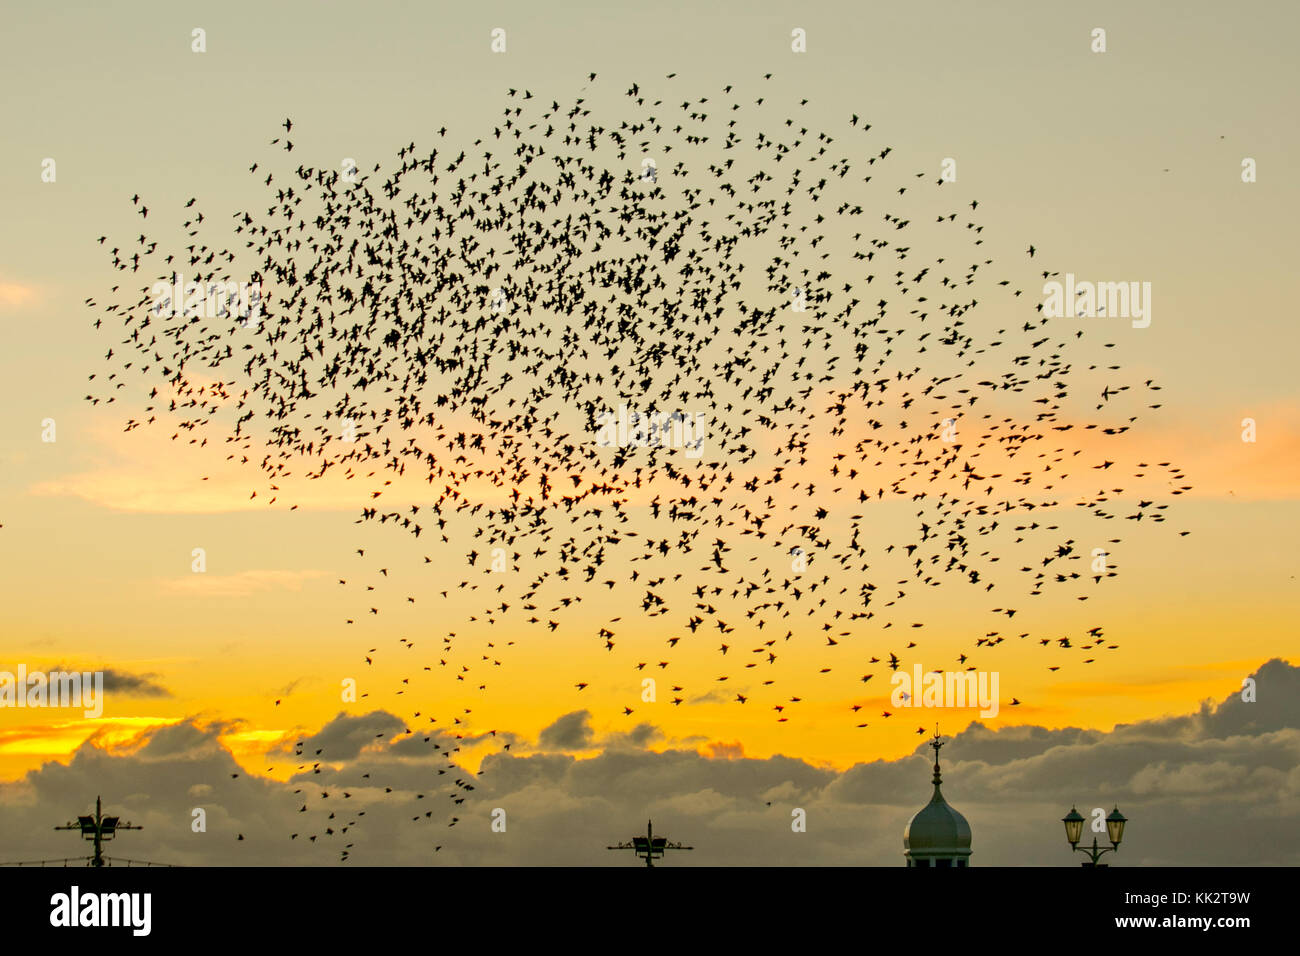 Blackpool, Lancashire, UK 28th November, 2017. UK Weather. Spectacular Starling flocks mumurate at sunset as thousands of starlings gather at the onset of a cold northerly winds on the west coast.   Regulated by in inbuilt light meter these flocks assemble, at sunset, from far and wide to john a communal roost under the North Pier. The murmur or chatter, the interaction between the huge numbers as they fly, is quite intense and is thought to form part of a communication of sorts. Credit. MediaWorldImages/AlamyLiveNews Stock Photo